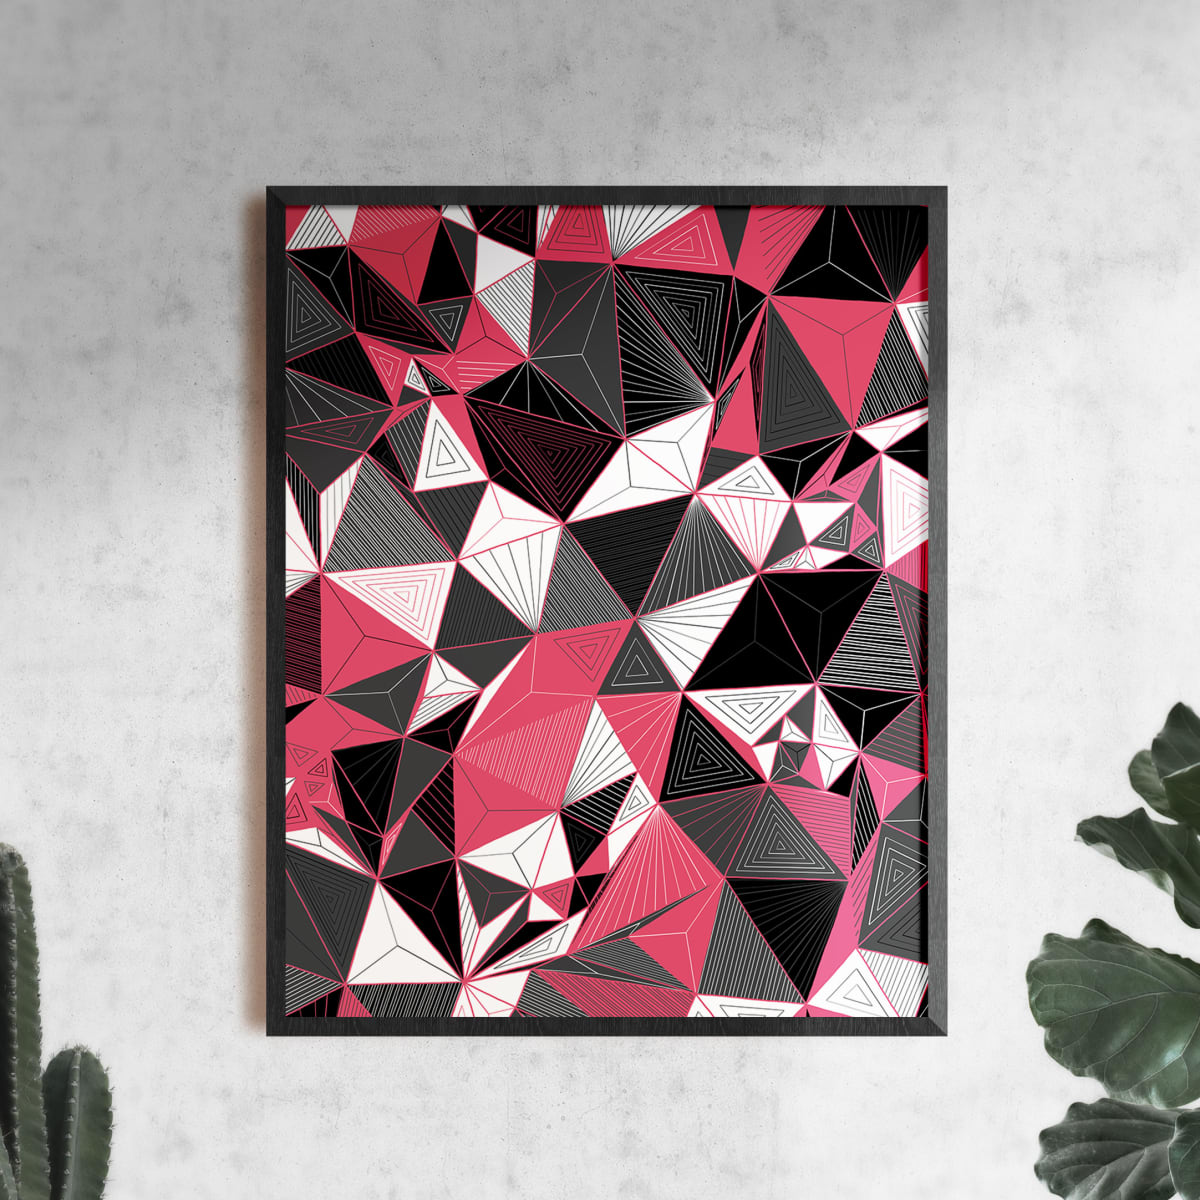 "Conscious Growth 068" Large One-of-a-Kind Print by Debbie Clapper  Image: Conscious Growth Print 068, a pink, black and white one of a kind archival modern art print